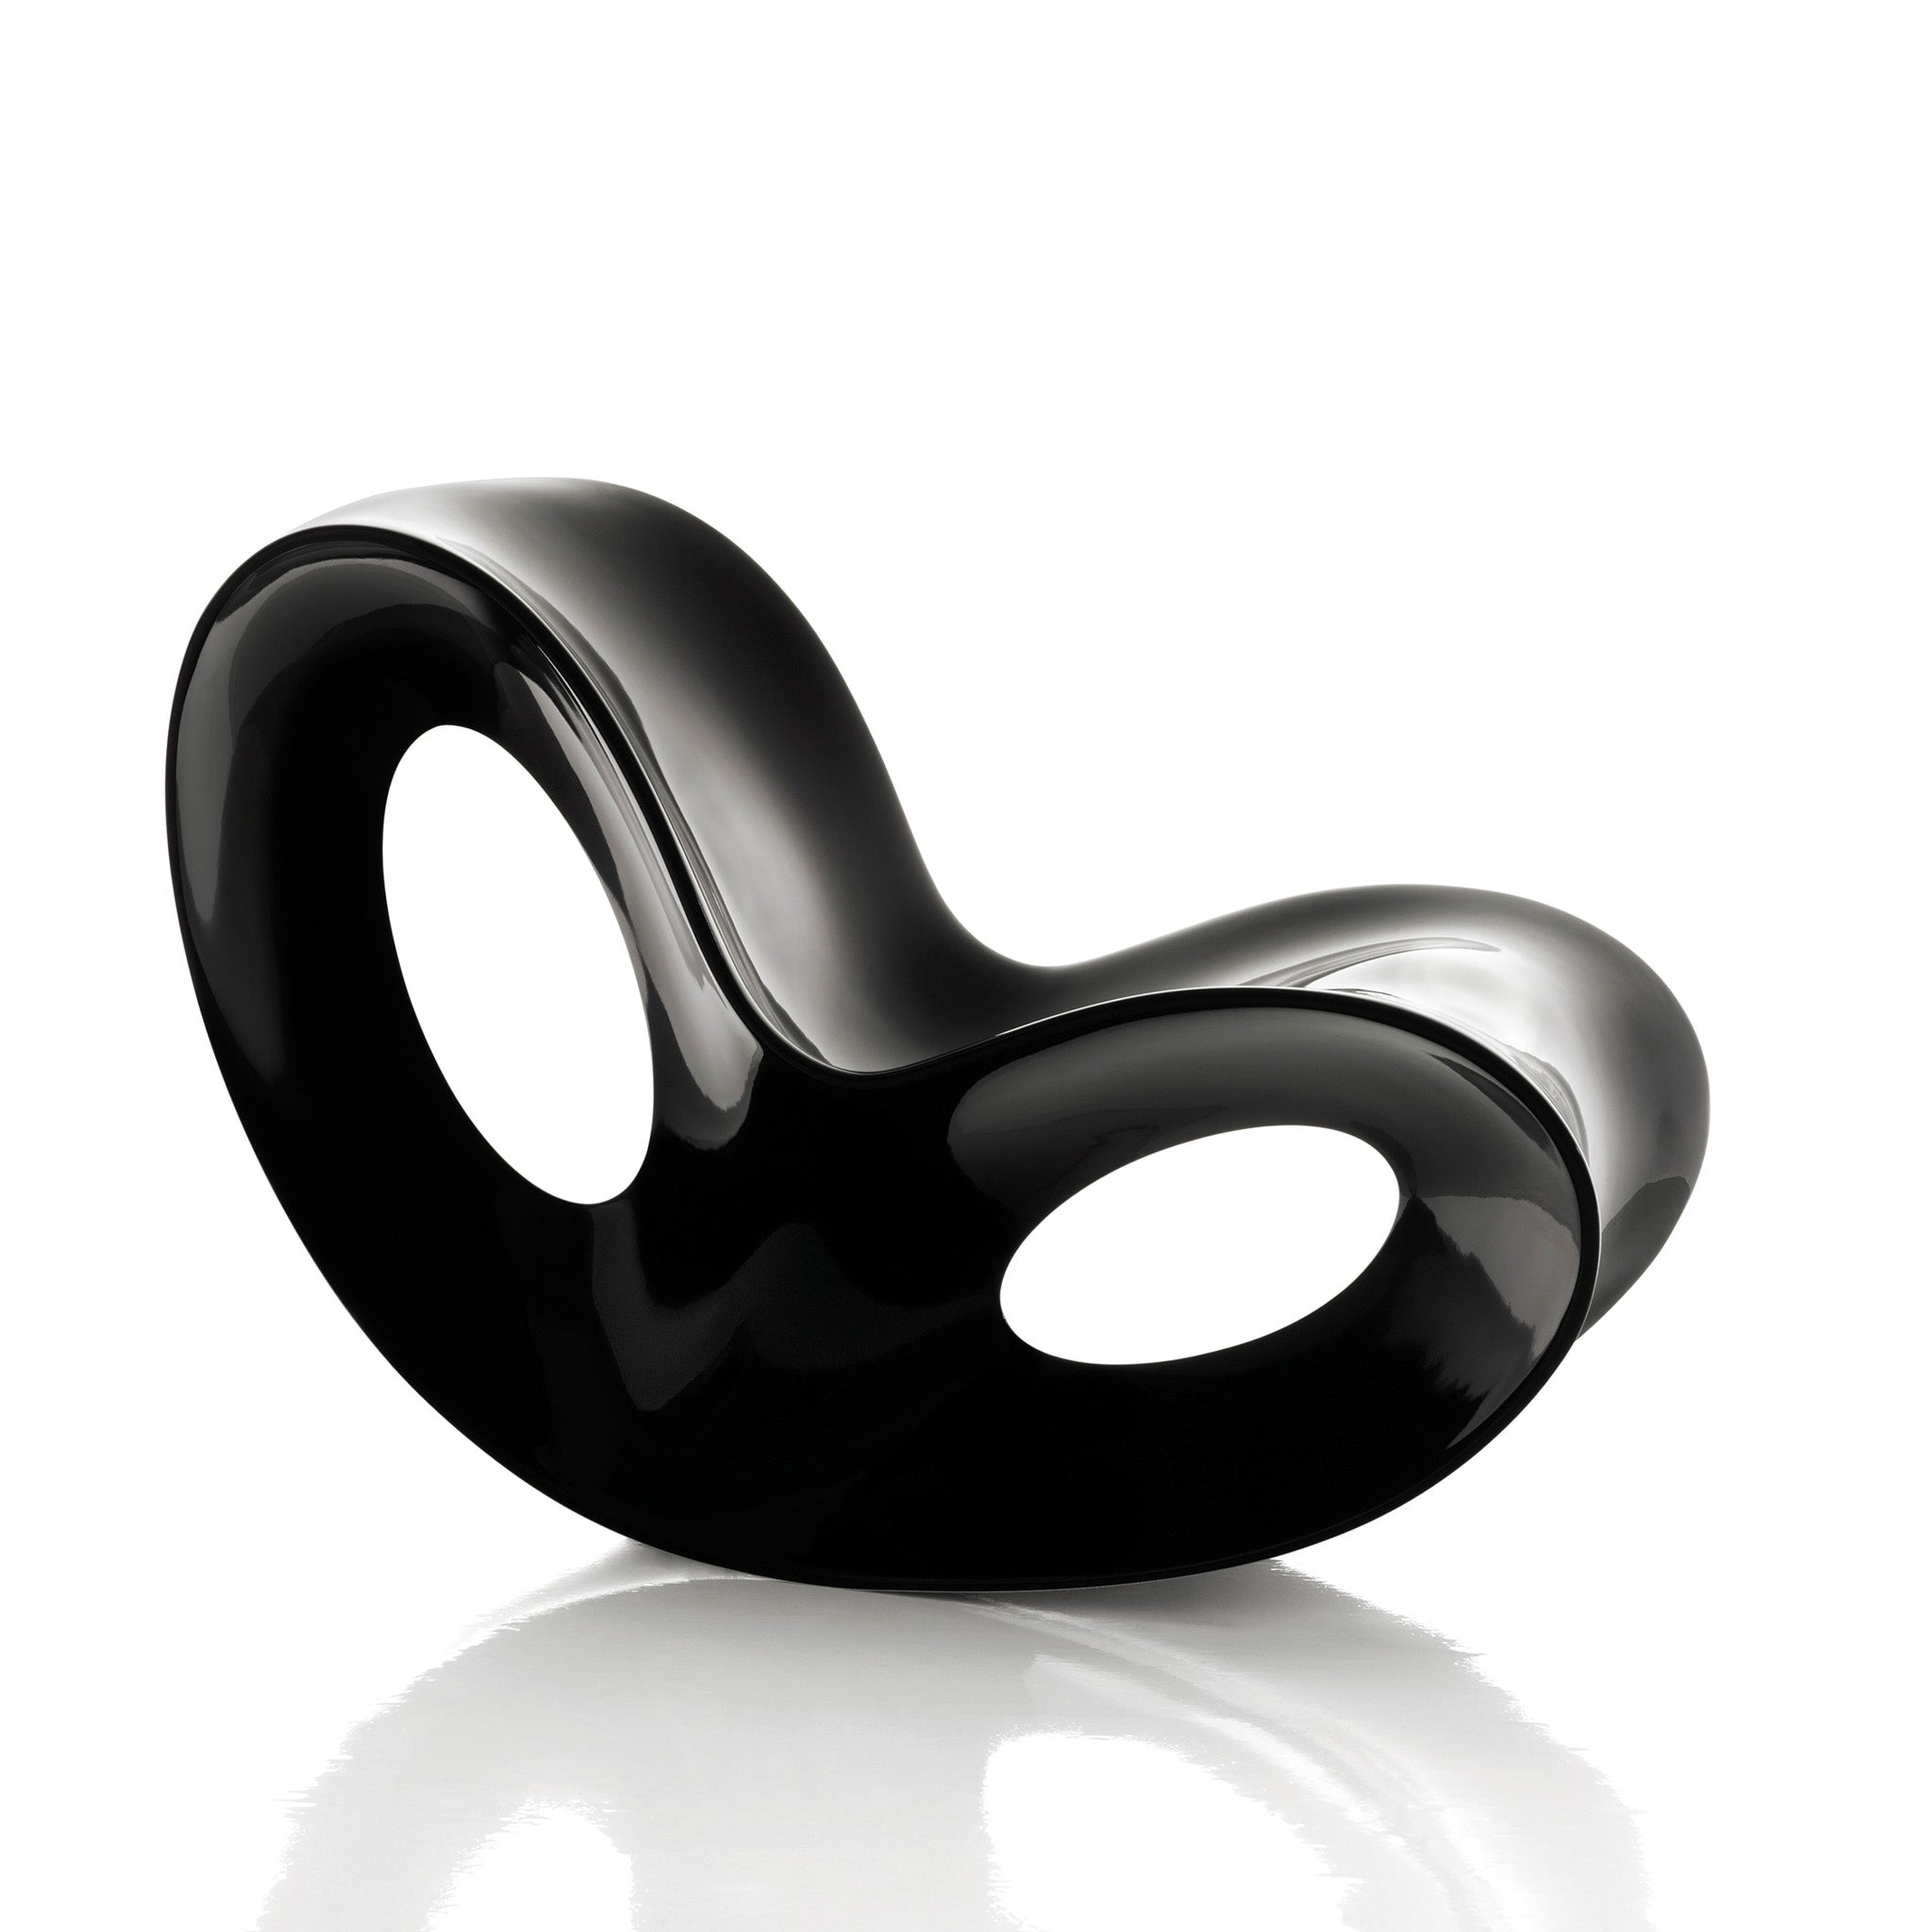 Voido Rocking Chair - Glossy by Magis